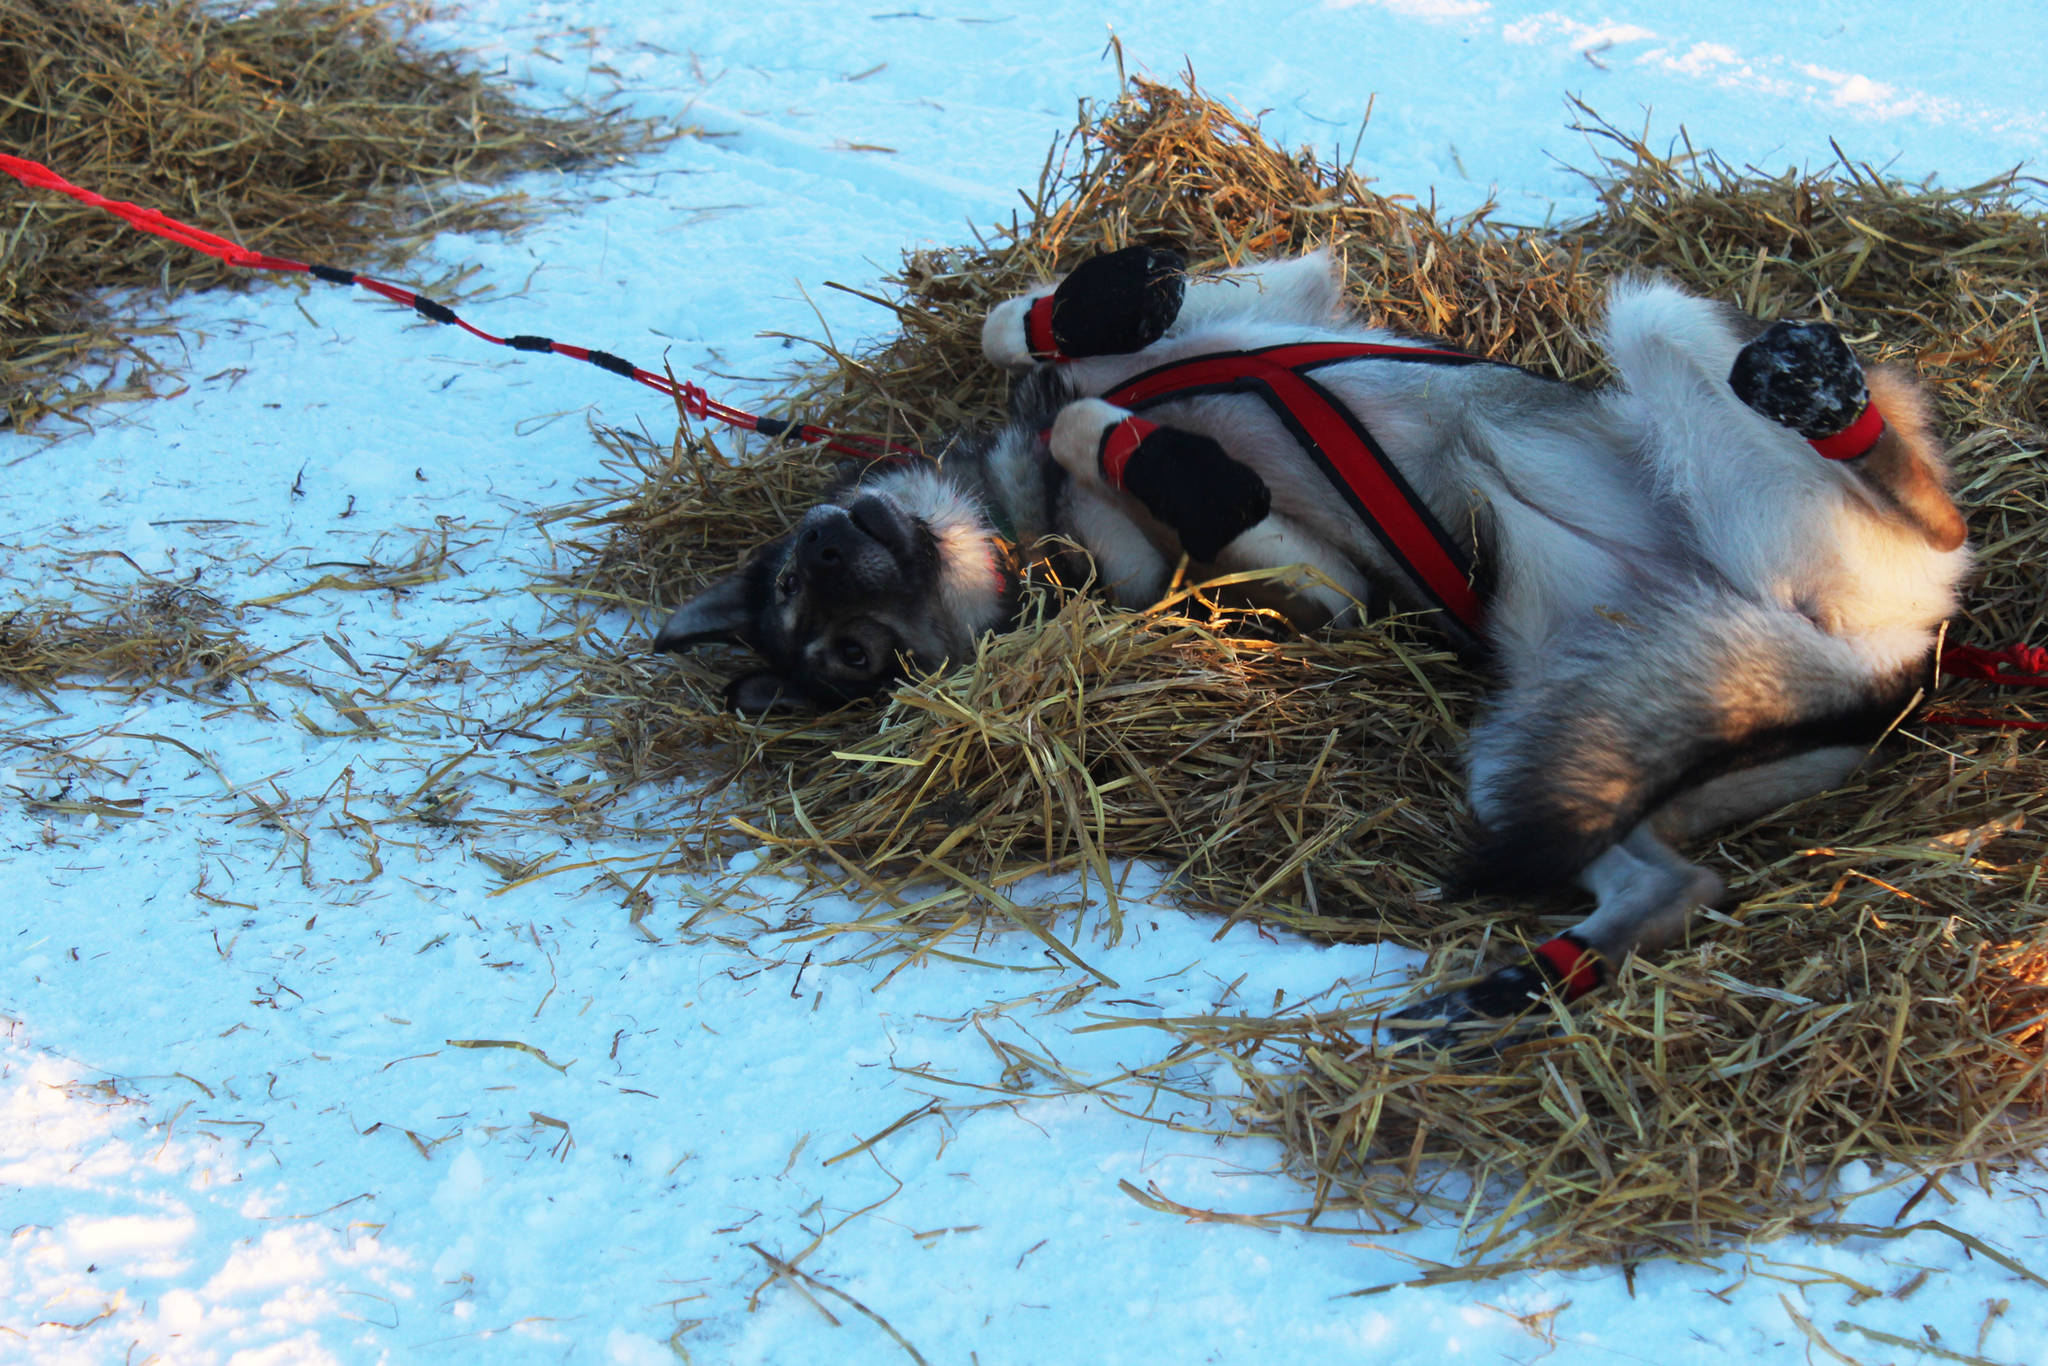 One of musher Nicolas Petit’s dogs enjoys taking a break in some hay at the first checkpoint of the Tustumena 200 Sled Dog Race on Saturday, Jan. 27, 2018 at McNeil Canyon Elementary School near Homer, Alaska. The teams will have three stops along the 100-mile loop that they will run twice to complete the race — two at McNeil Canyon and one at Freddie’s Roadhouse in Ninilchik, where the race will also end. (Photo by Megan Pacer/Homer News)